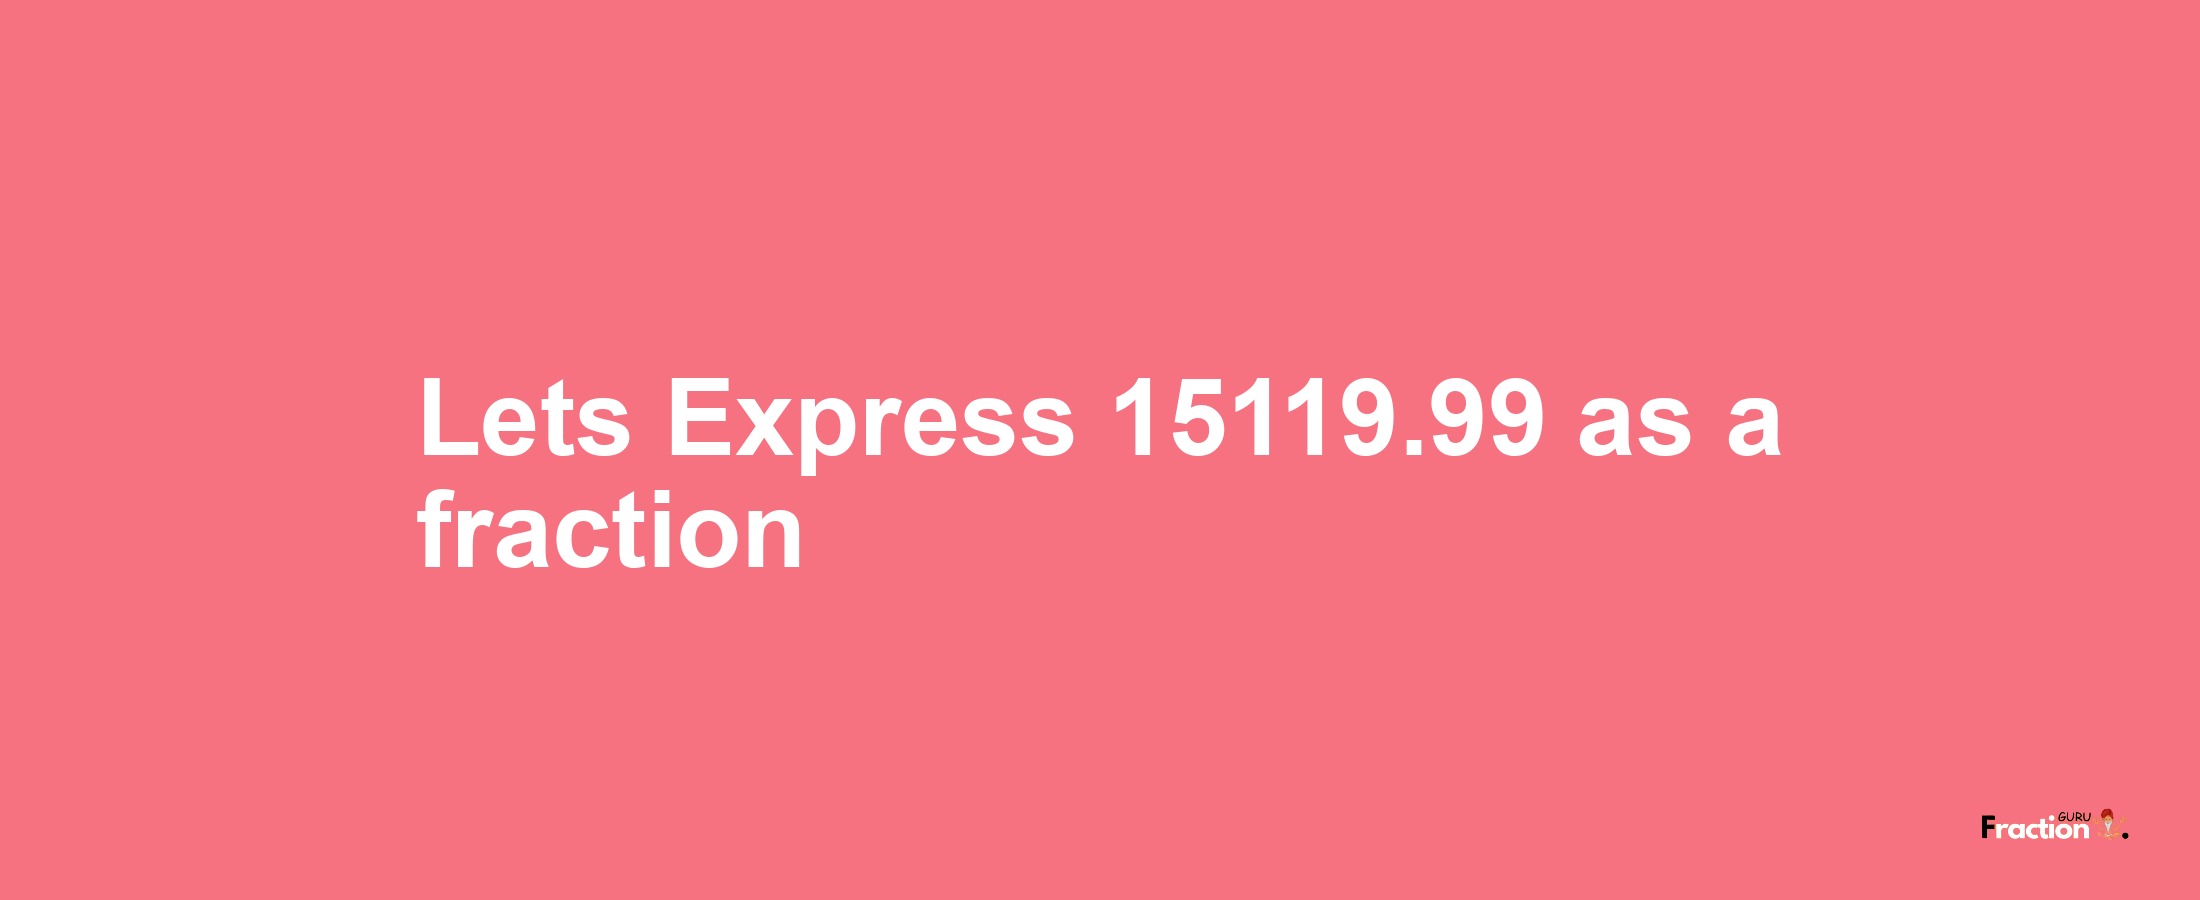 Lets Express 15119.99 as afraction